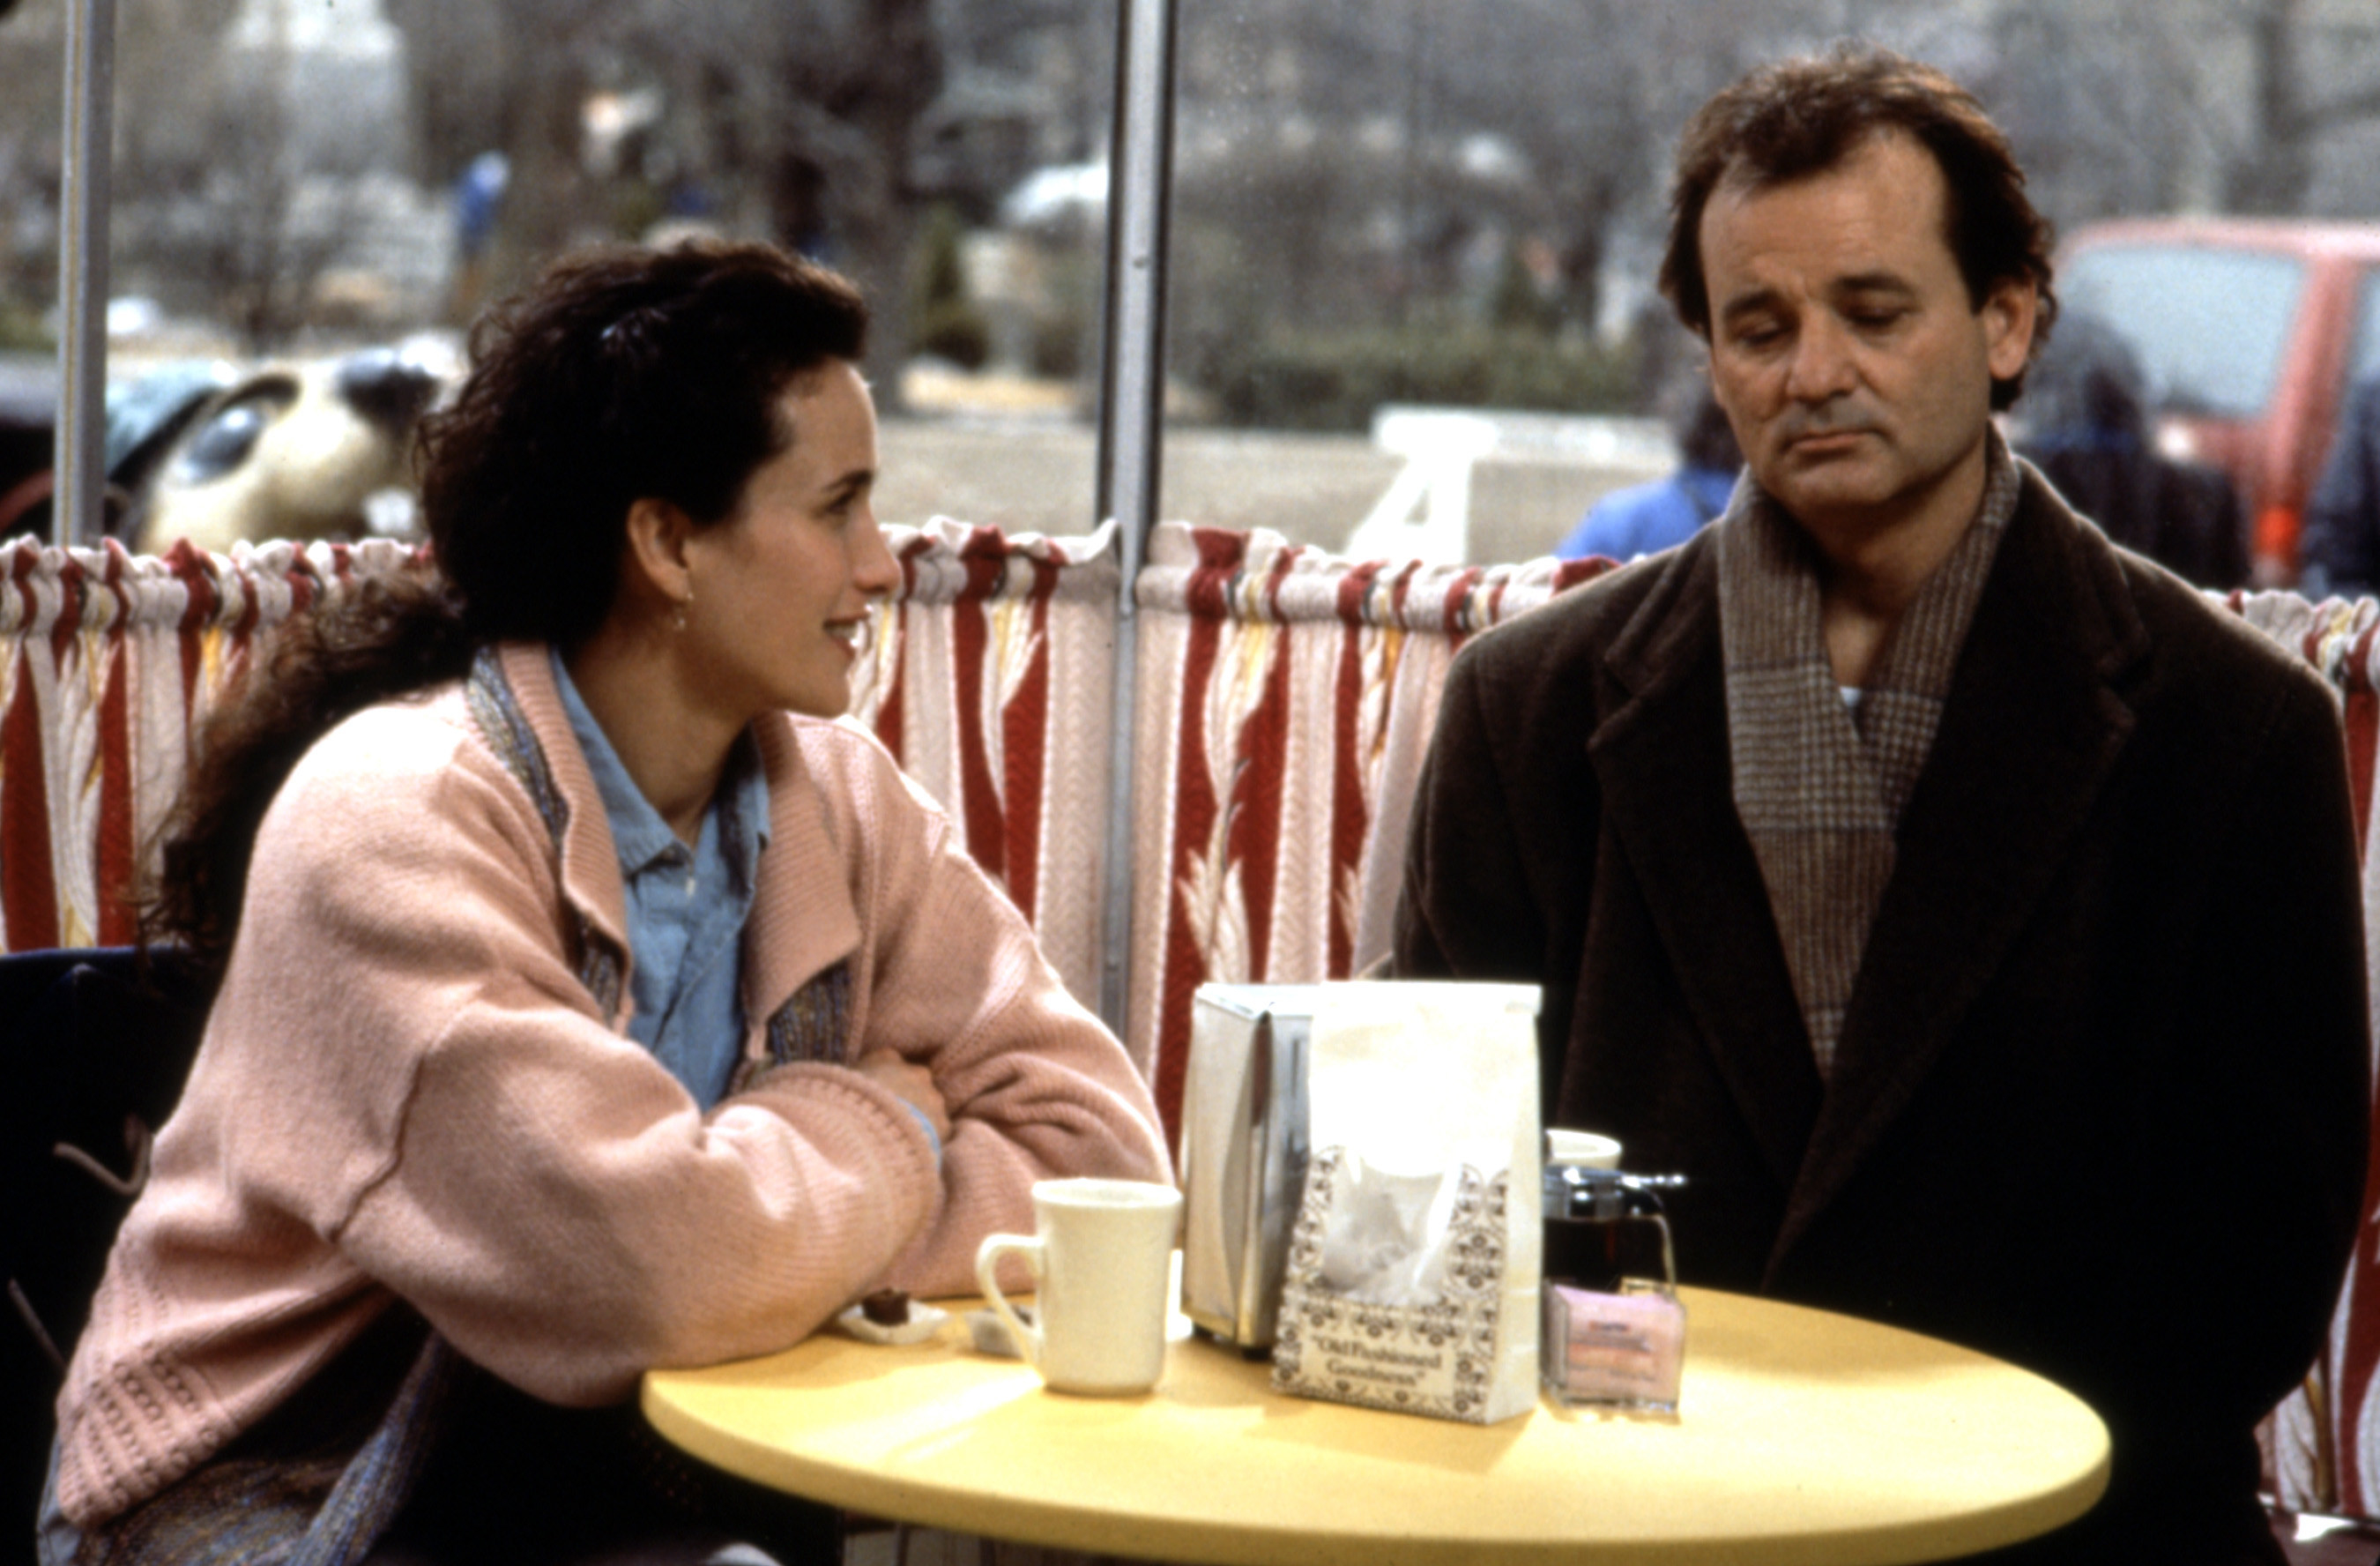 Andie MacDowell and Bill Murray sit together at a table